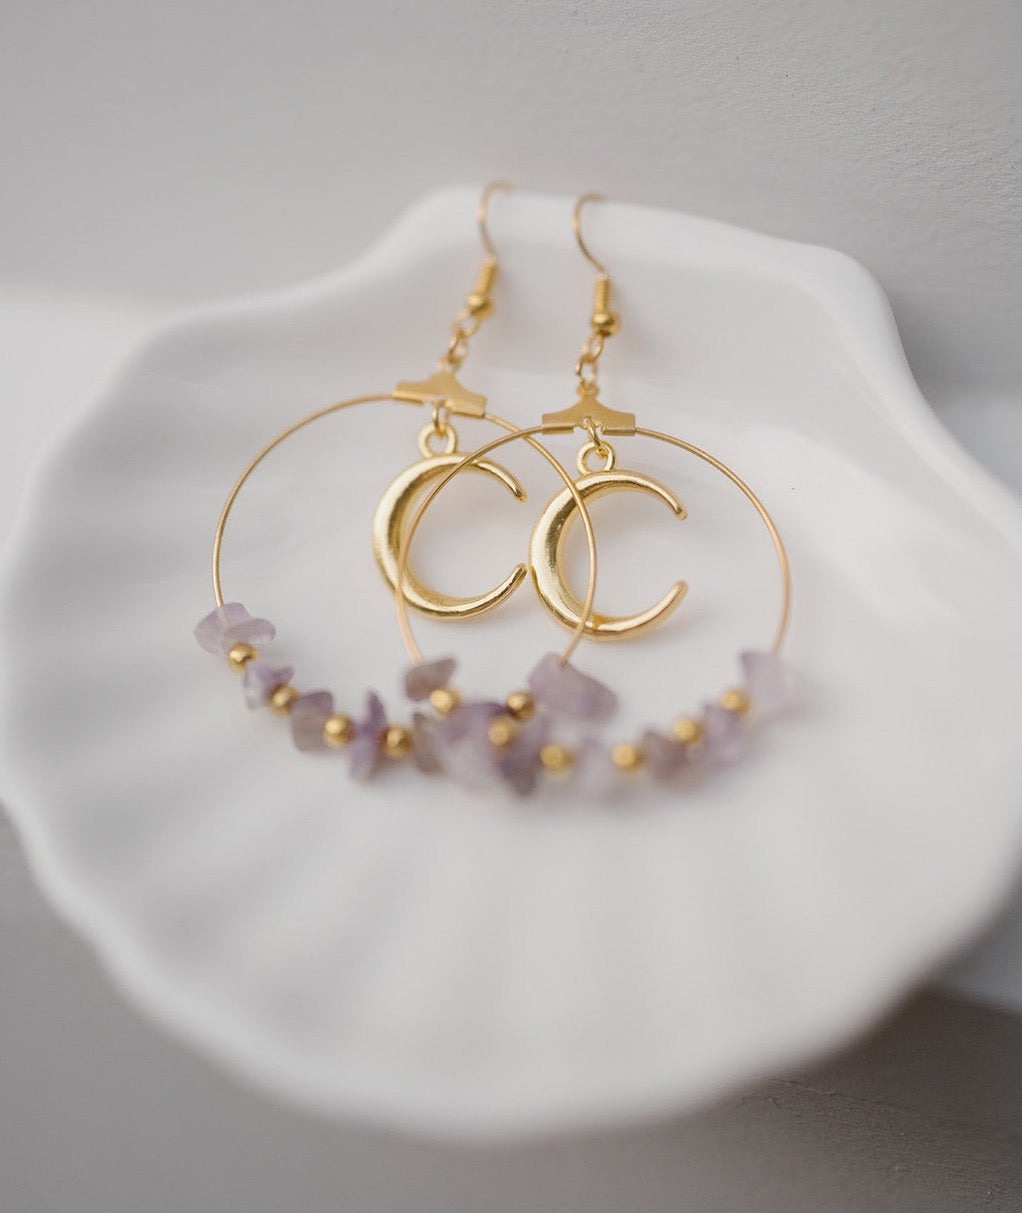 hoop earrings with moon symbol and amethyst crystals